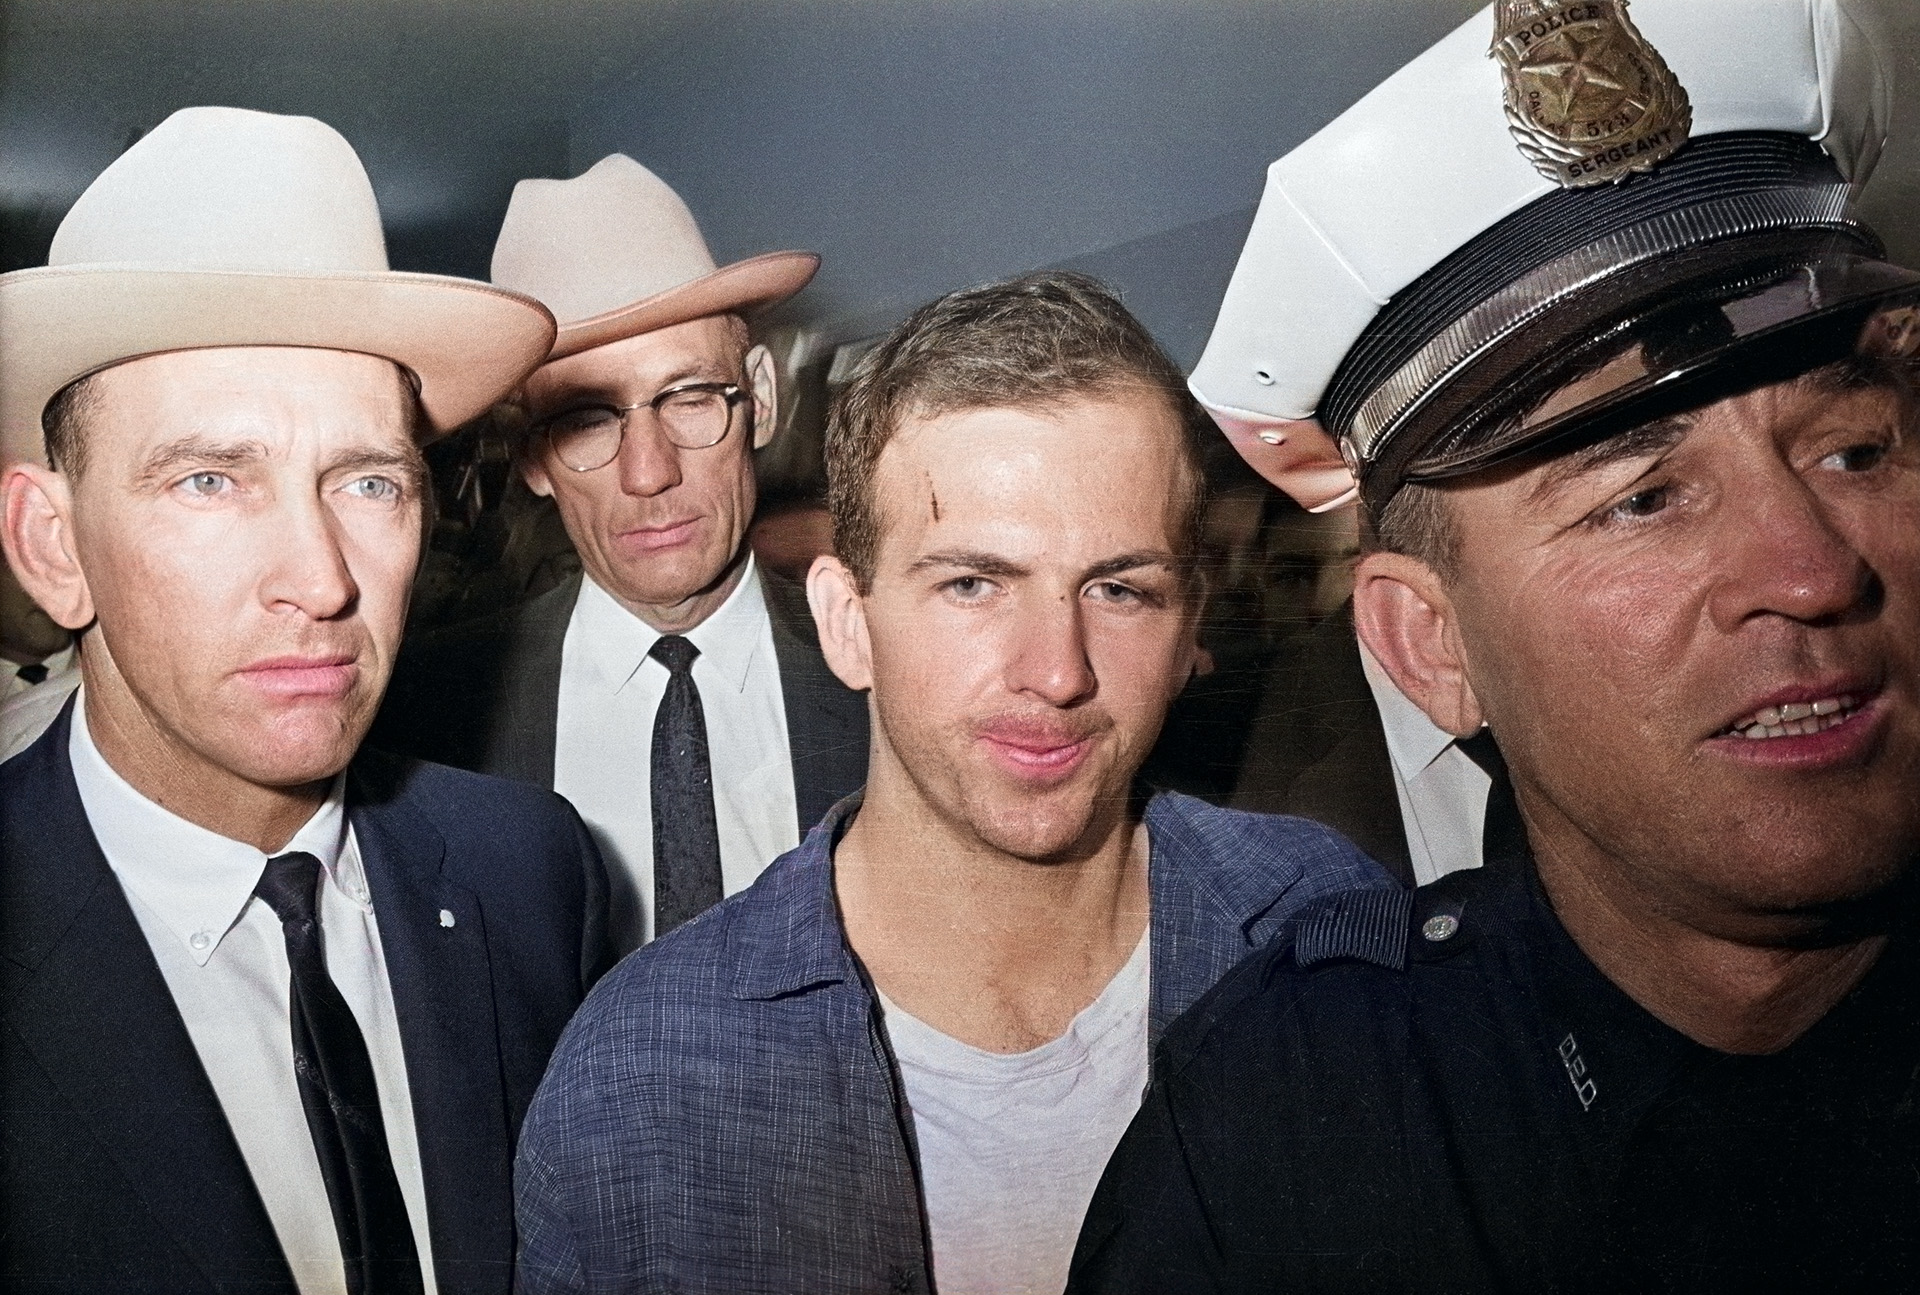 Colorized image of Lee Harvey Oswald in handcuffs, escorted by law enforcement officers.